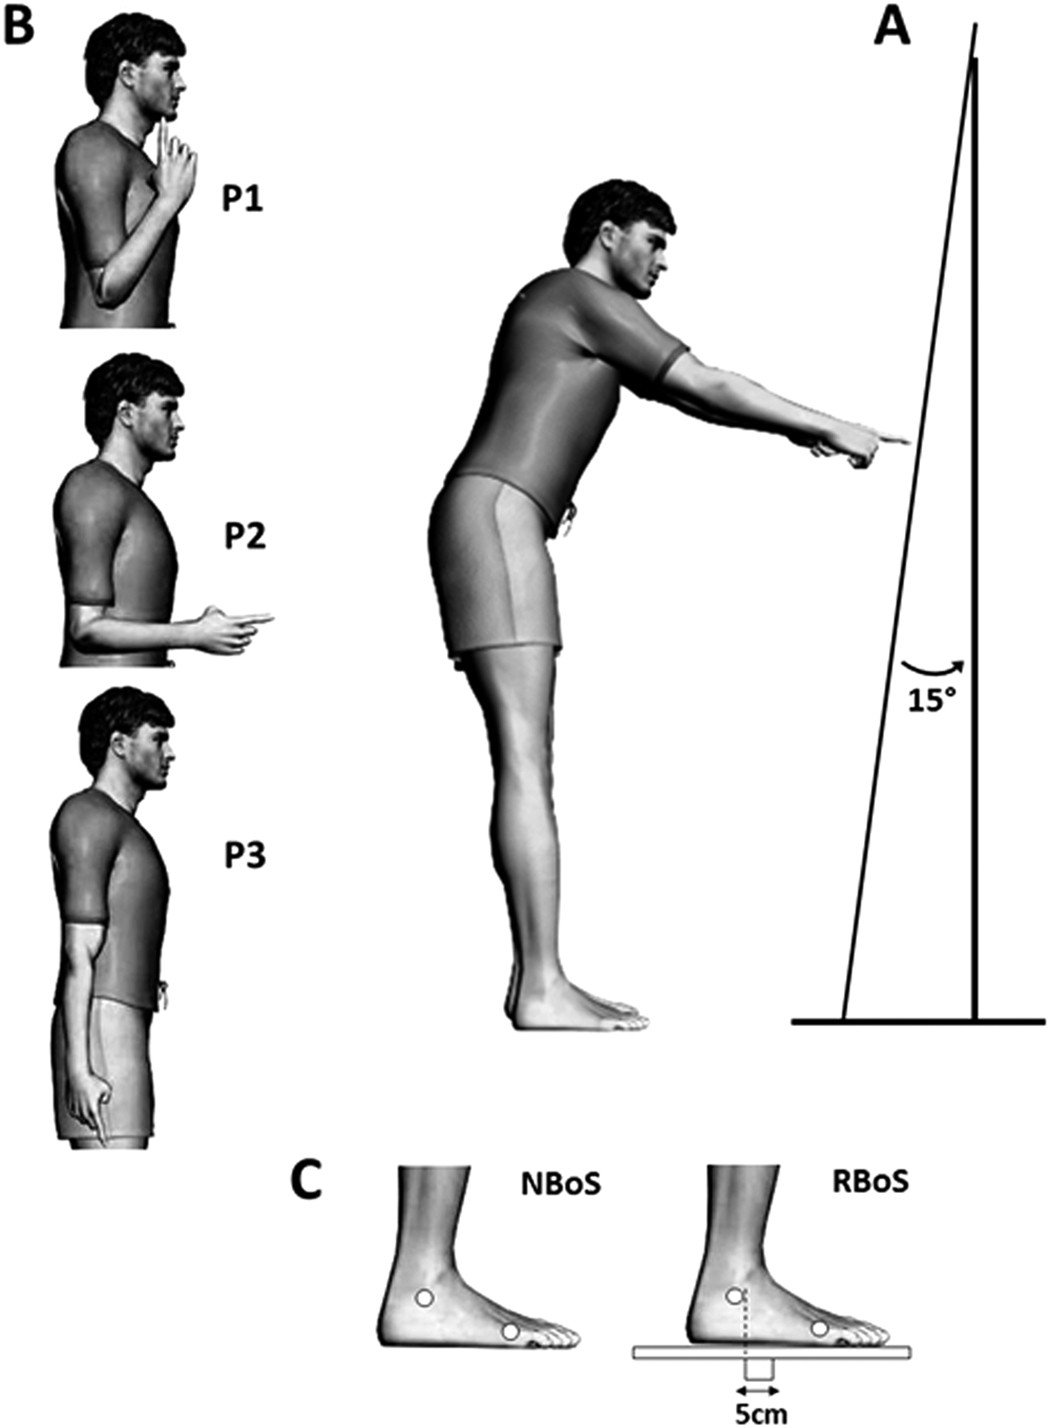 Evidence for subjective values guiding posture and movement